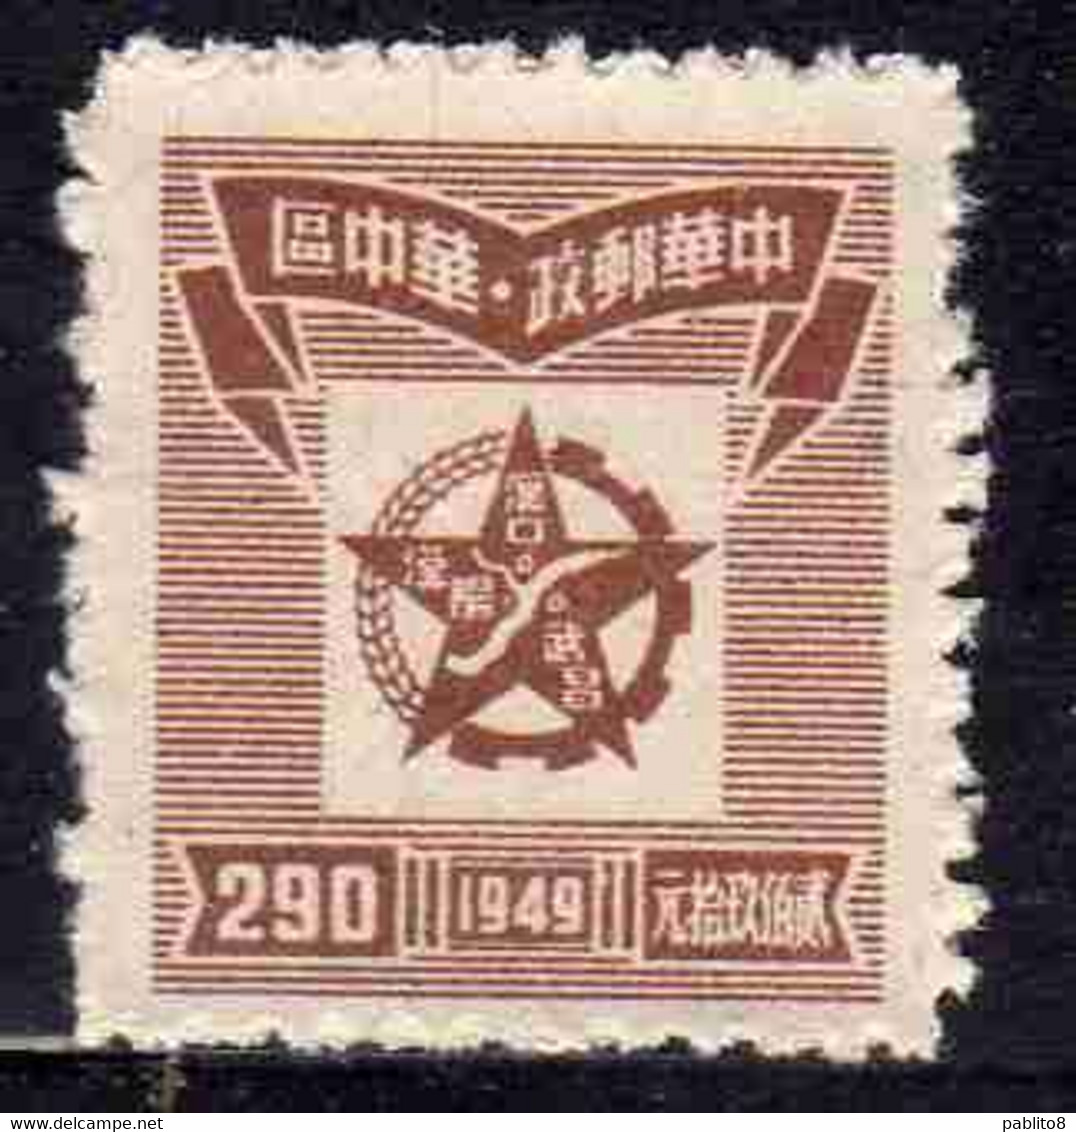 CENTRAL CHINA CINA CENTRALE 1949 Posts And Telegraph ADMINISTRATION Star Enclosing Map Of Hankow Area 290$ NG - Central China 1948-49